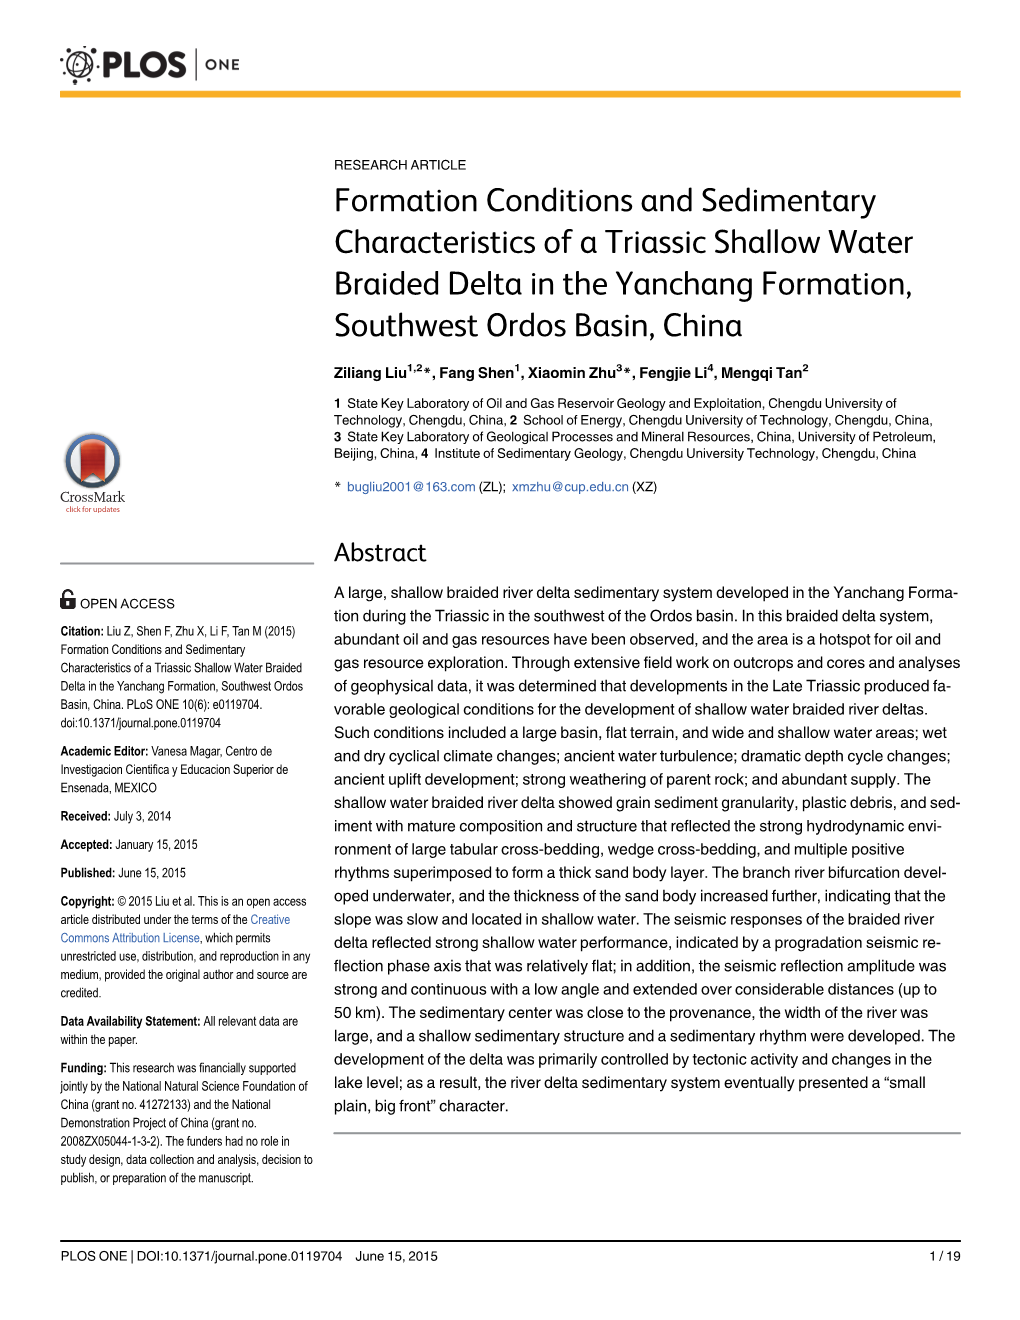 Formation Conditions and Sedimentary Characteristics of a Triassic Shallow Water Braided Delta in the Yanchang Formation, Southwest Ordos Basin, China